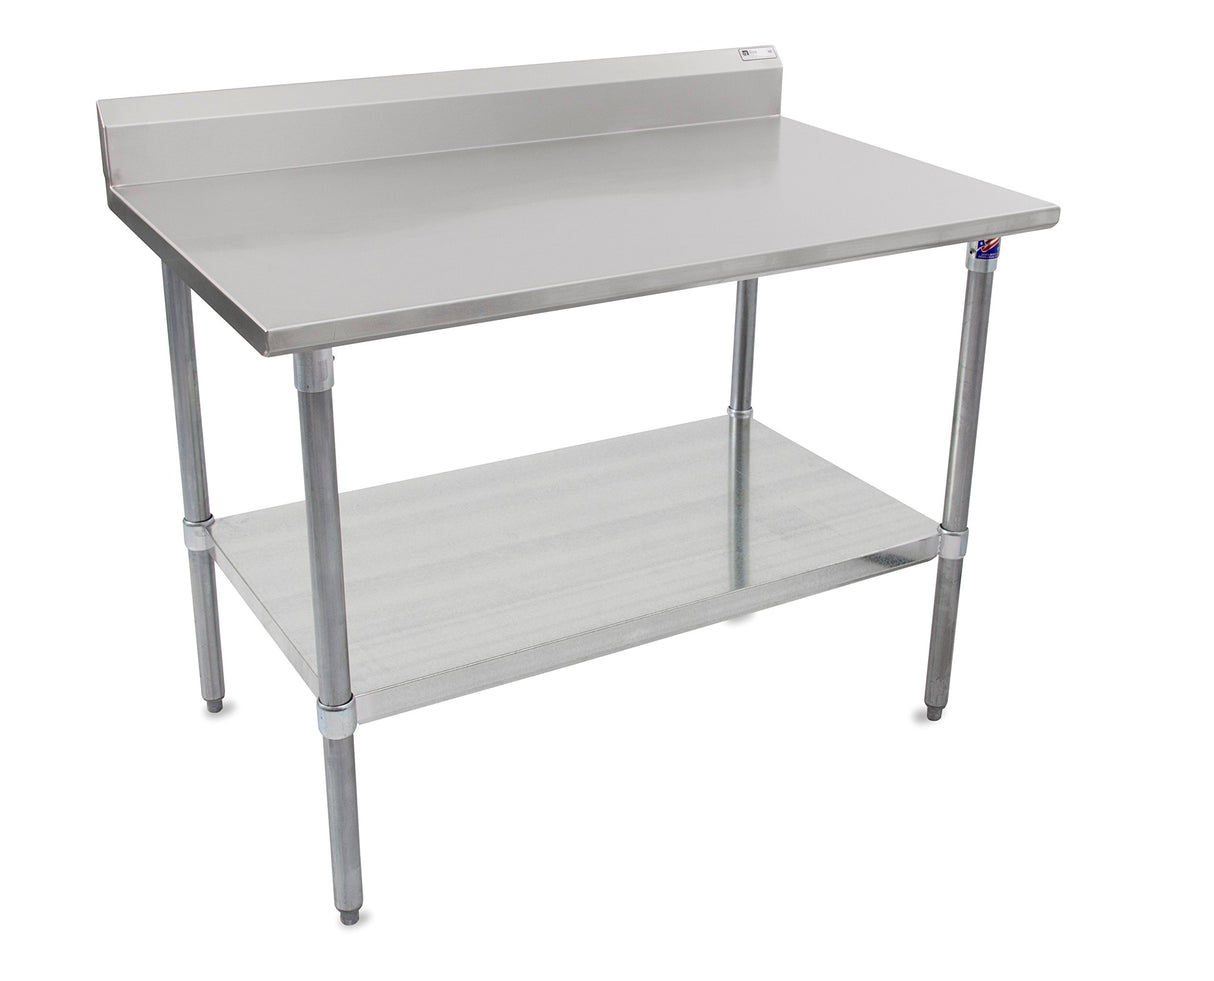 John Boos ST6R5-3096GSK Stallion Stainless Steel 5" Riser Top Work Table with Adjustable Galvanized Lower Shelf and Legs, 96" Length x 30" Width